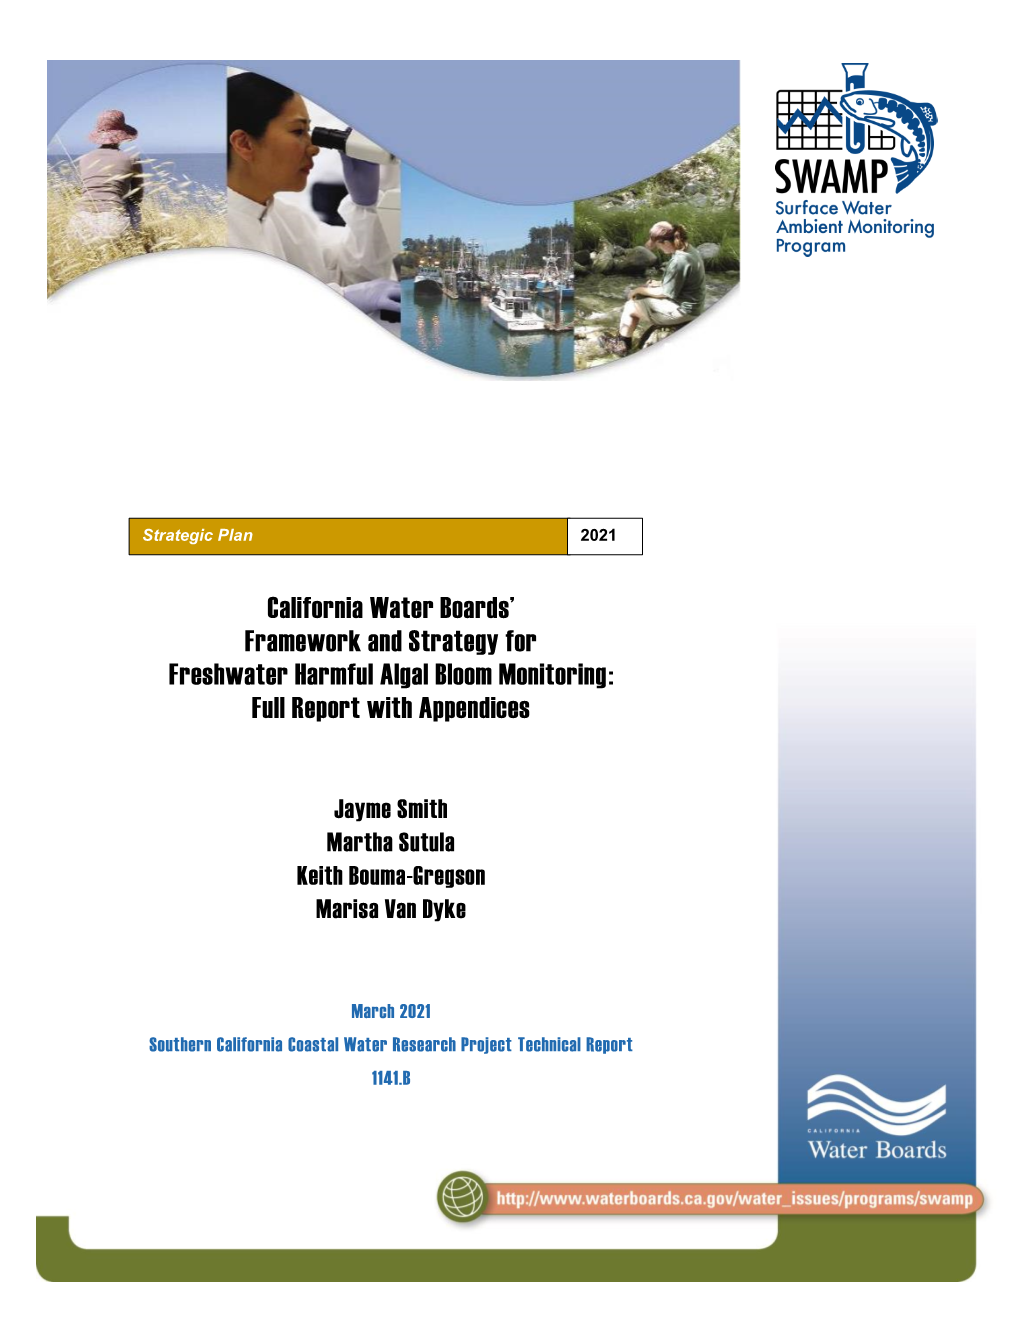 California Water Boards' Framework and Strategy for Freshwater Harmful Algal Bloom Monitoring: Full Report with Appendices